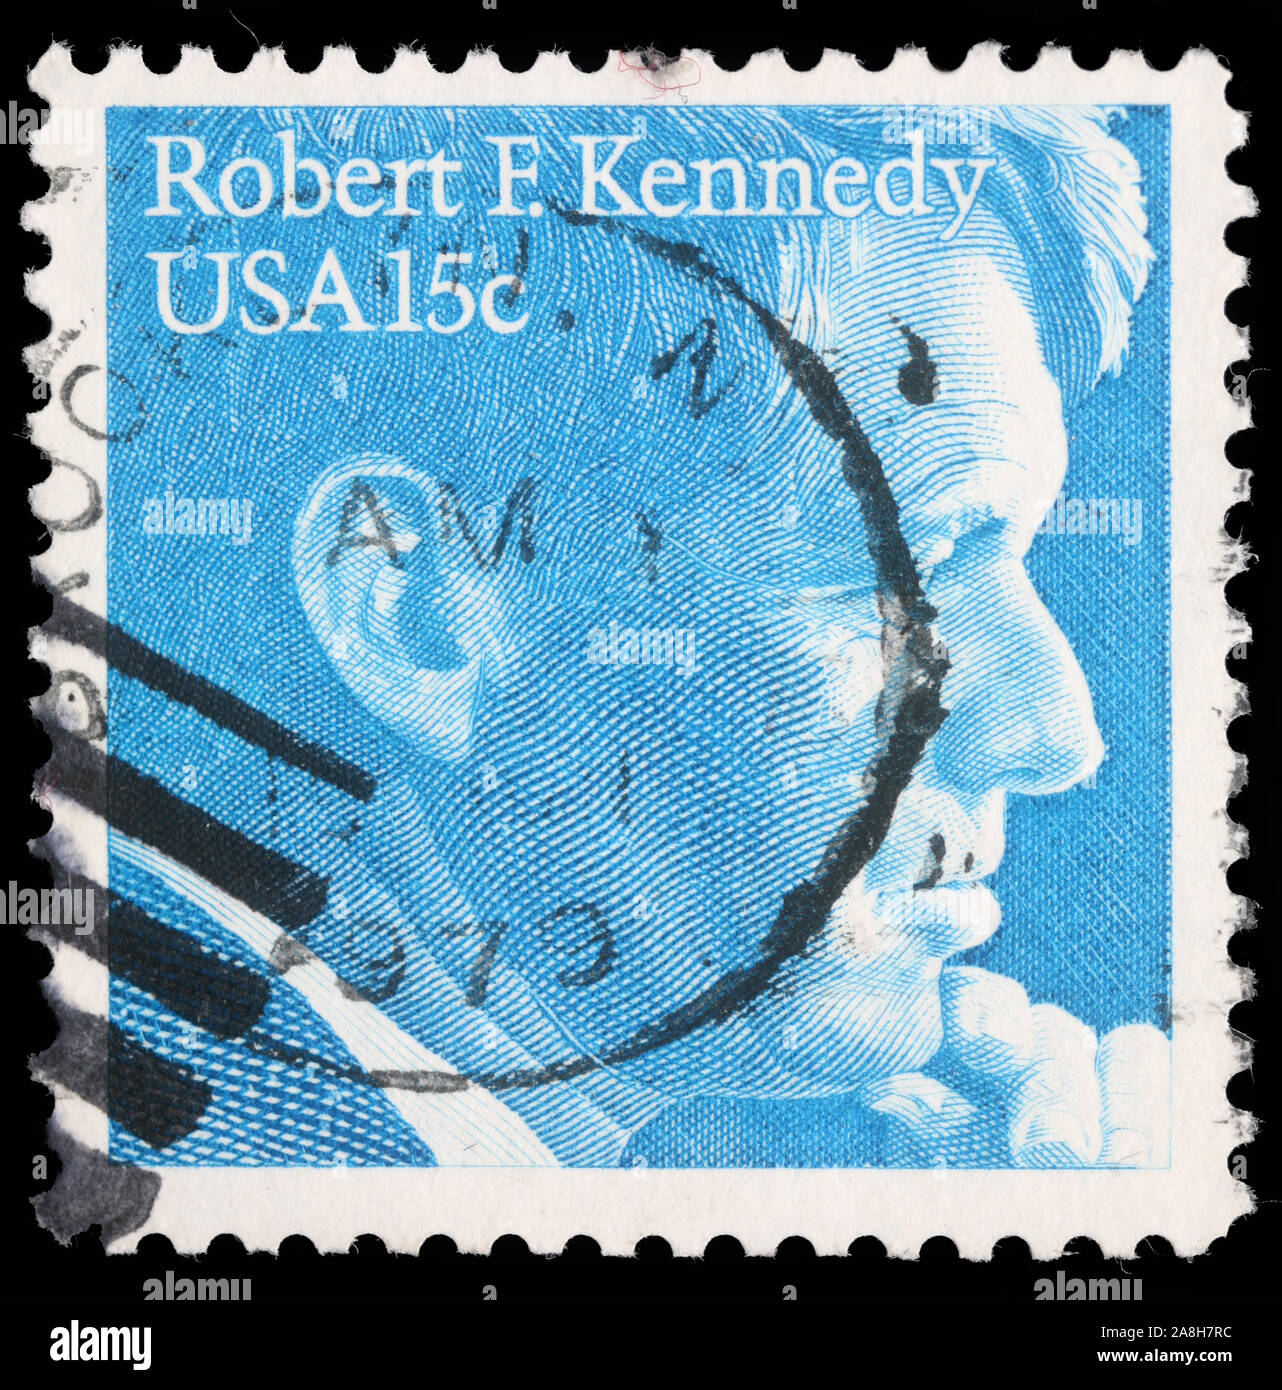 Stamp printed in USA, shows Robert Kennedy, circa 1978 Stock Photo